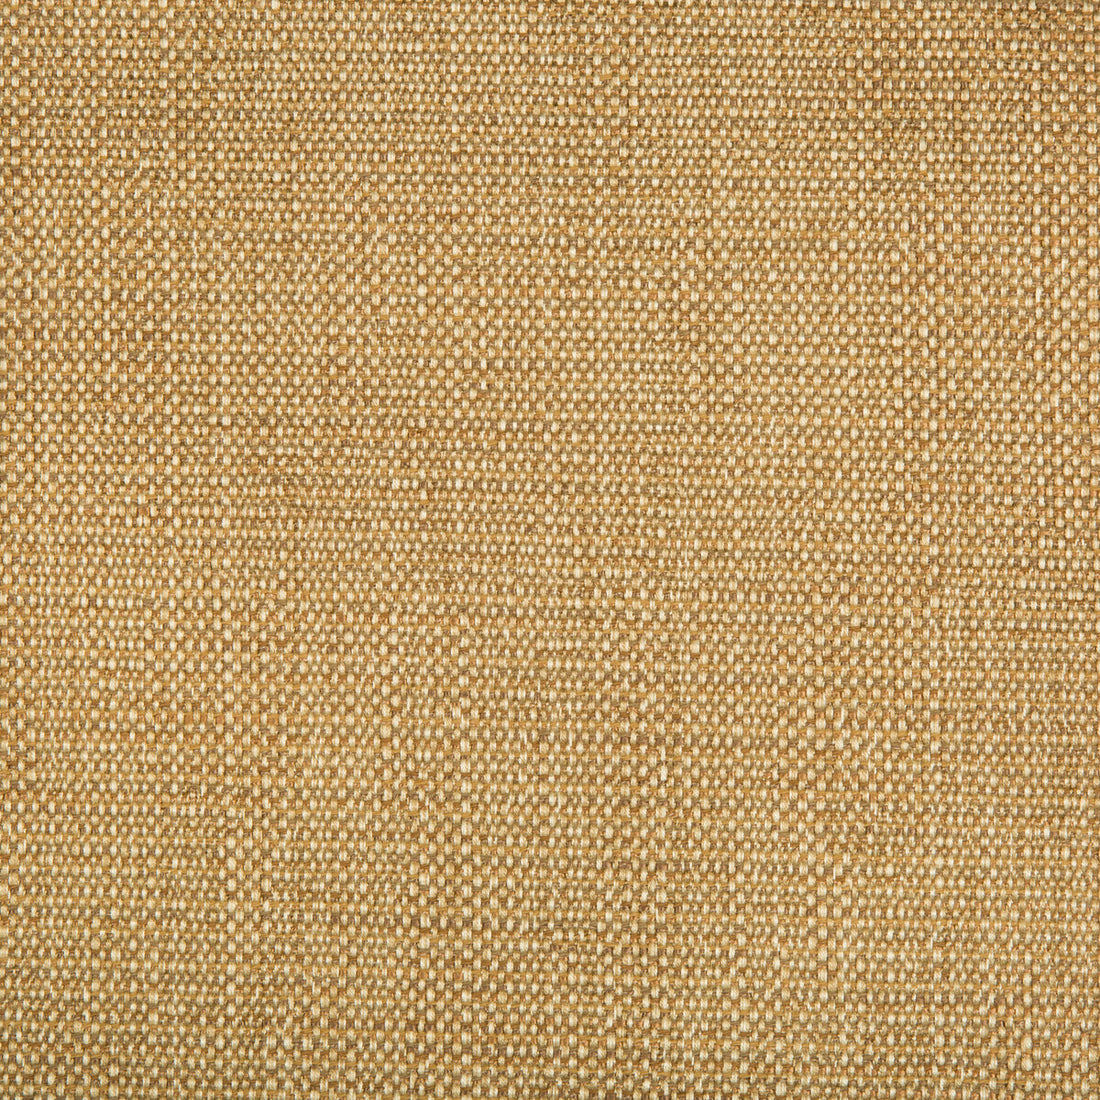 Kravet Contract fabric in 34768-616 color - pattern 34768.616.0 - by Kravet Contract in the Gis collection